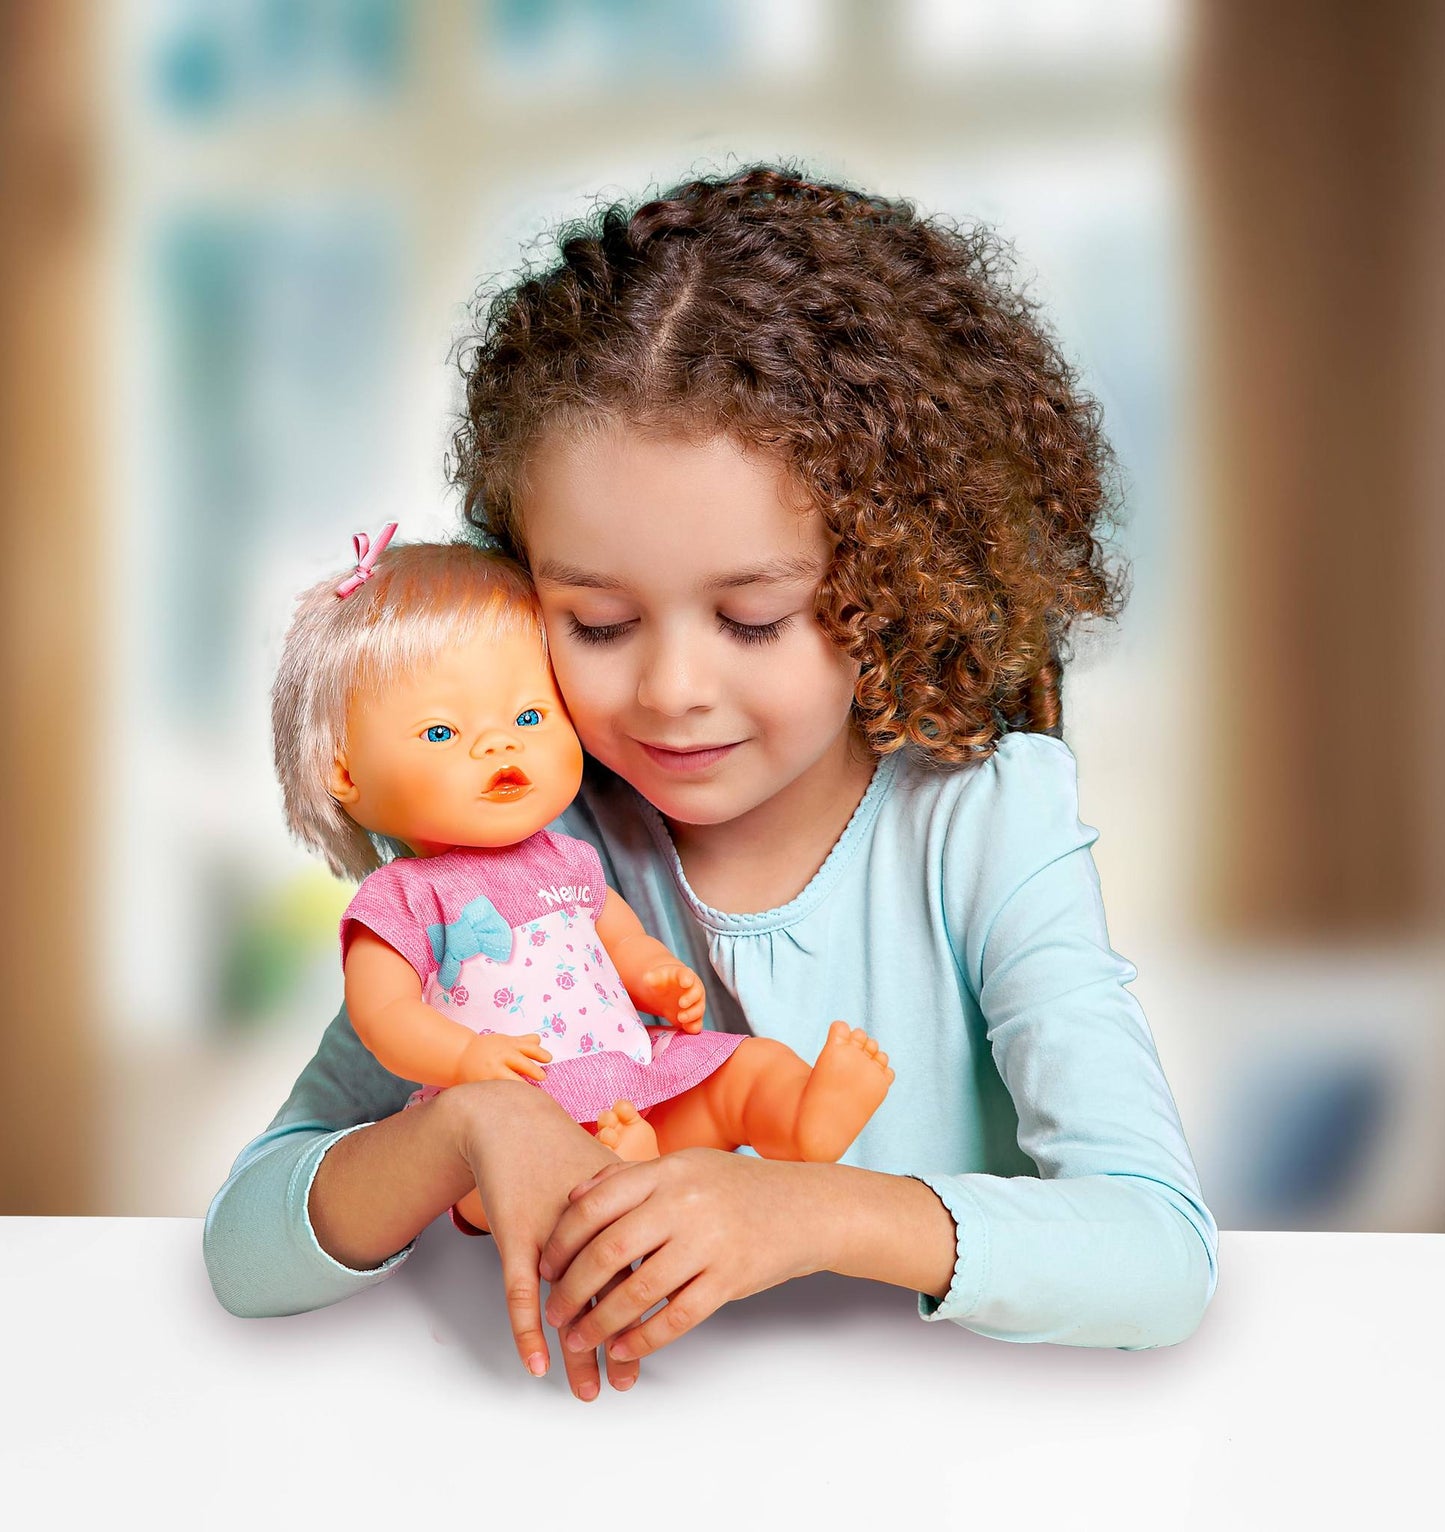 Nenuco Baby Doll with Down Syndrome, 35cm